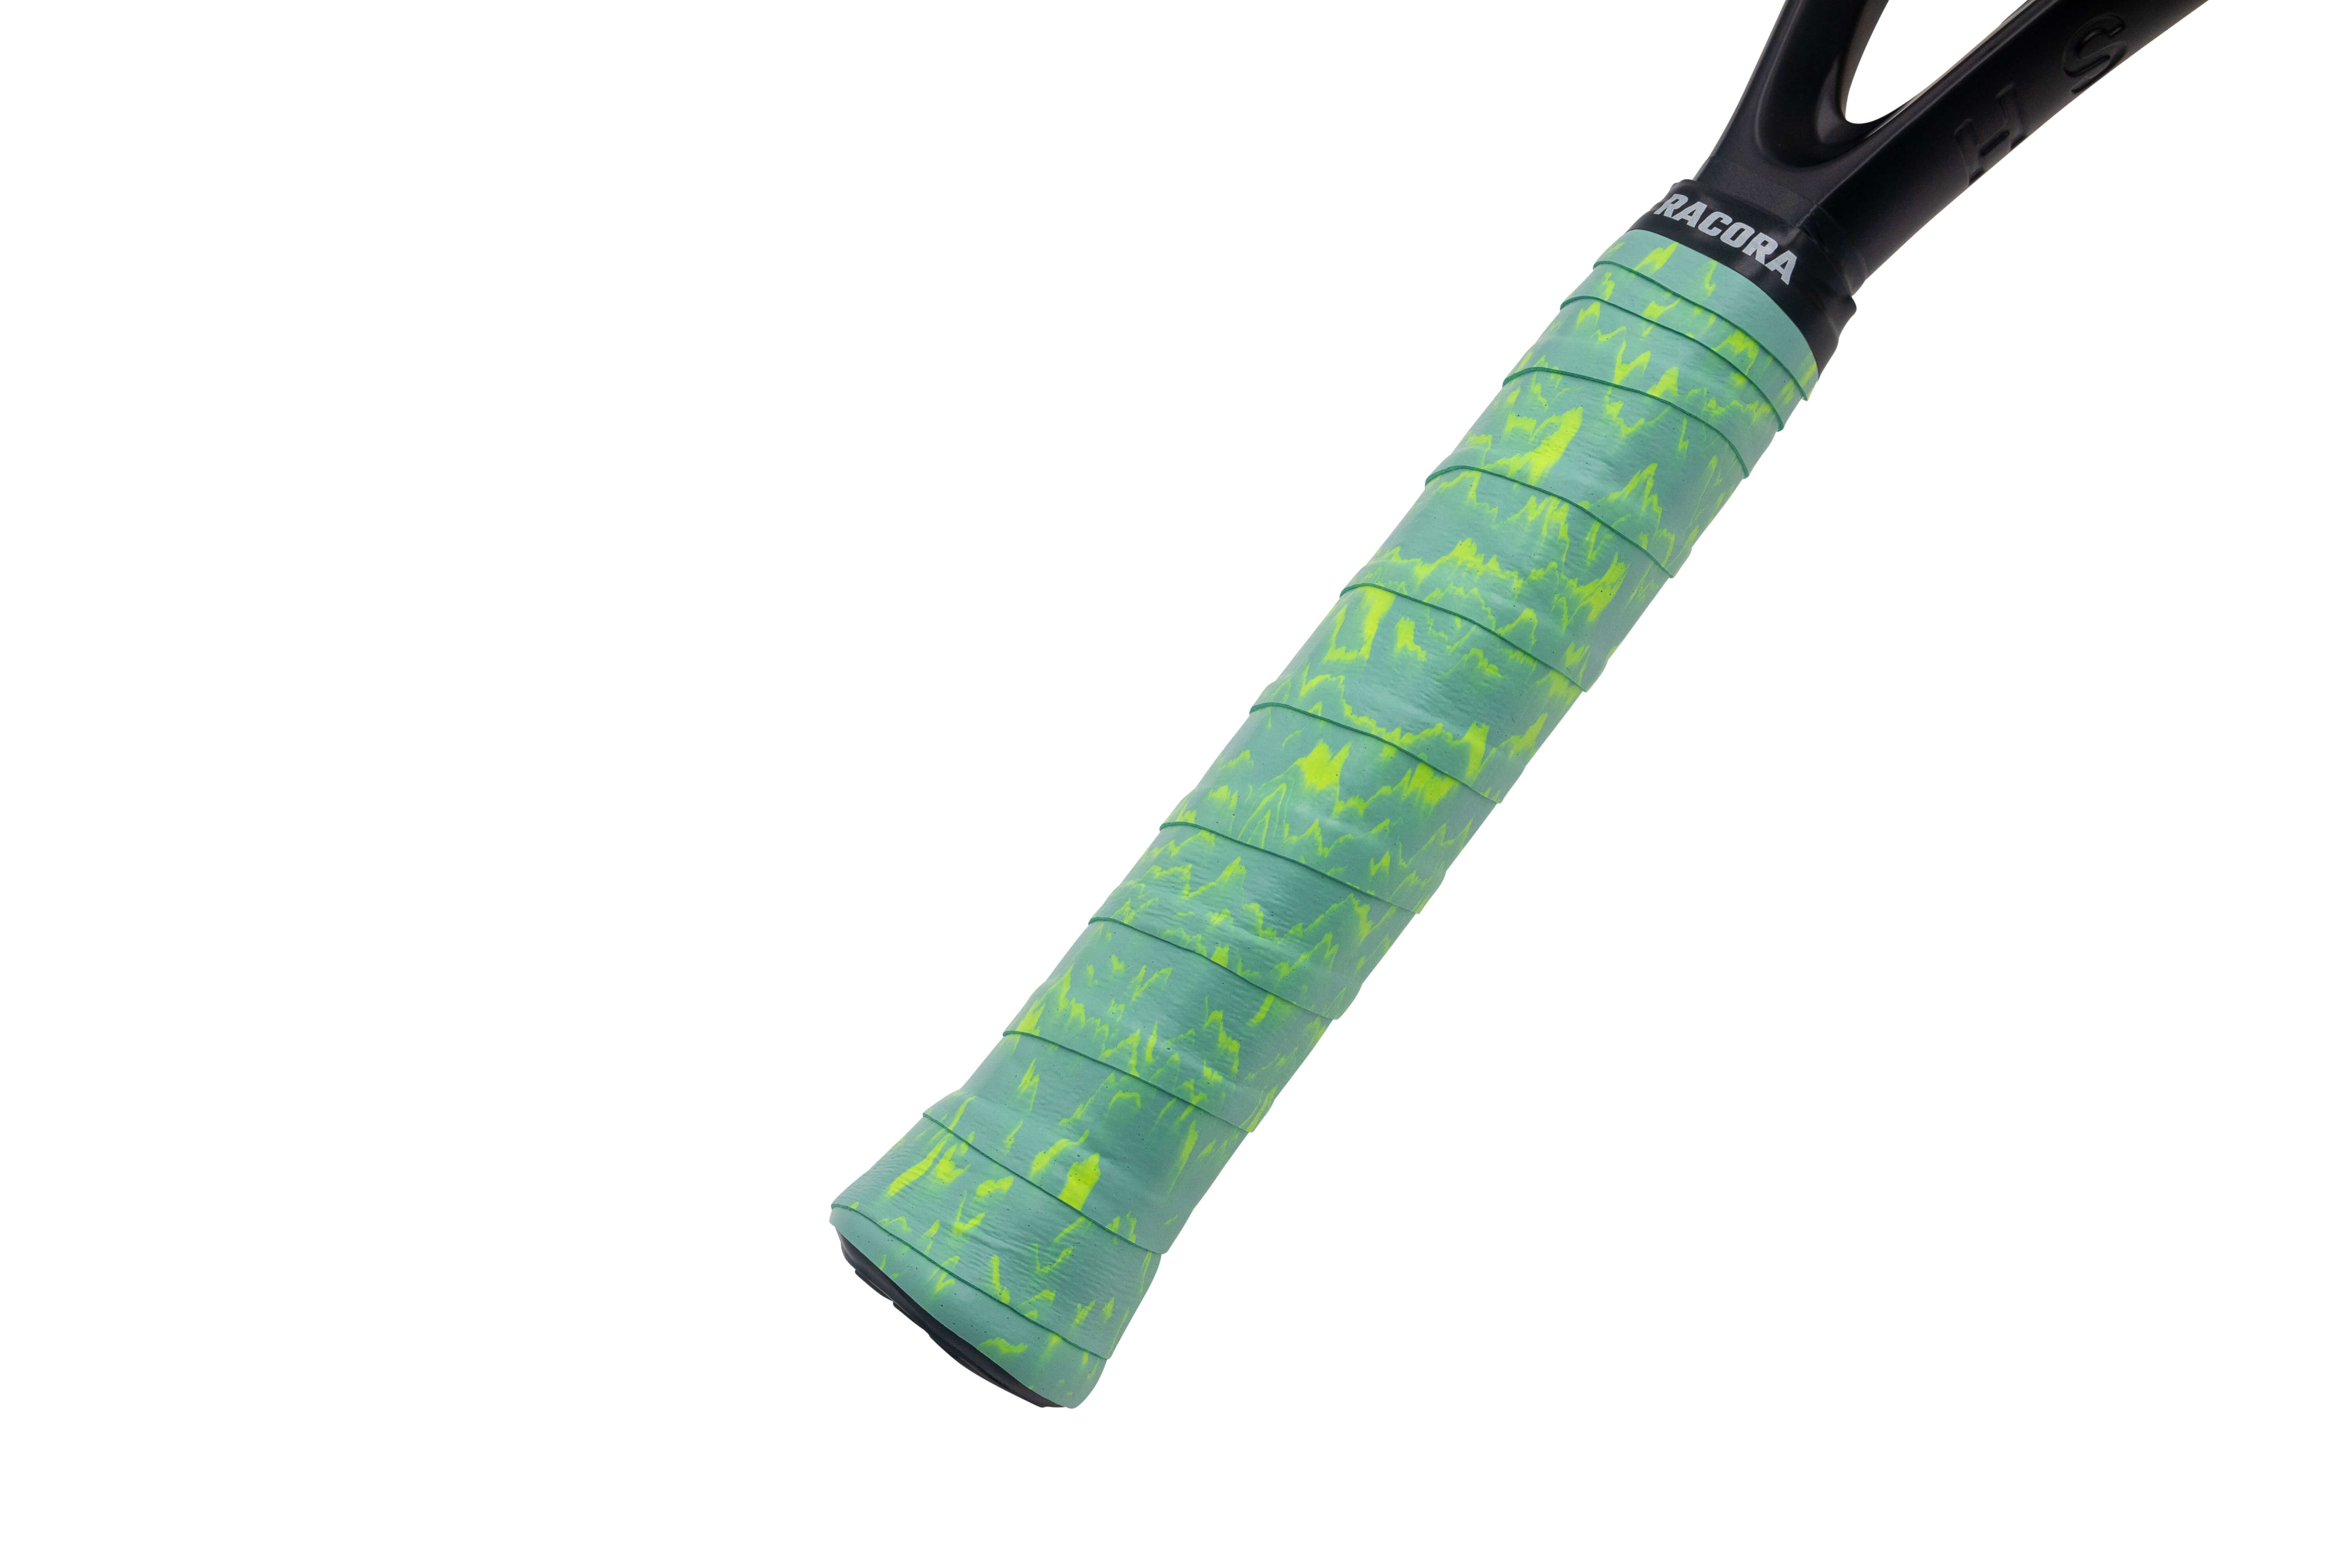 Green waves tennis overgrip on tennis racket, held at an angle